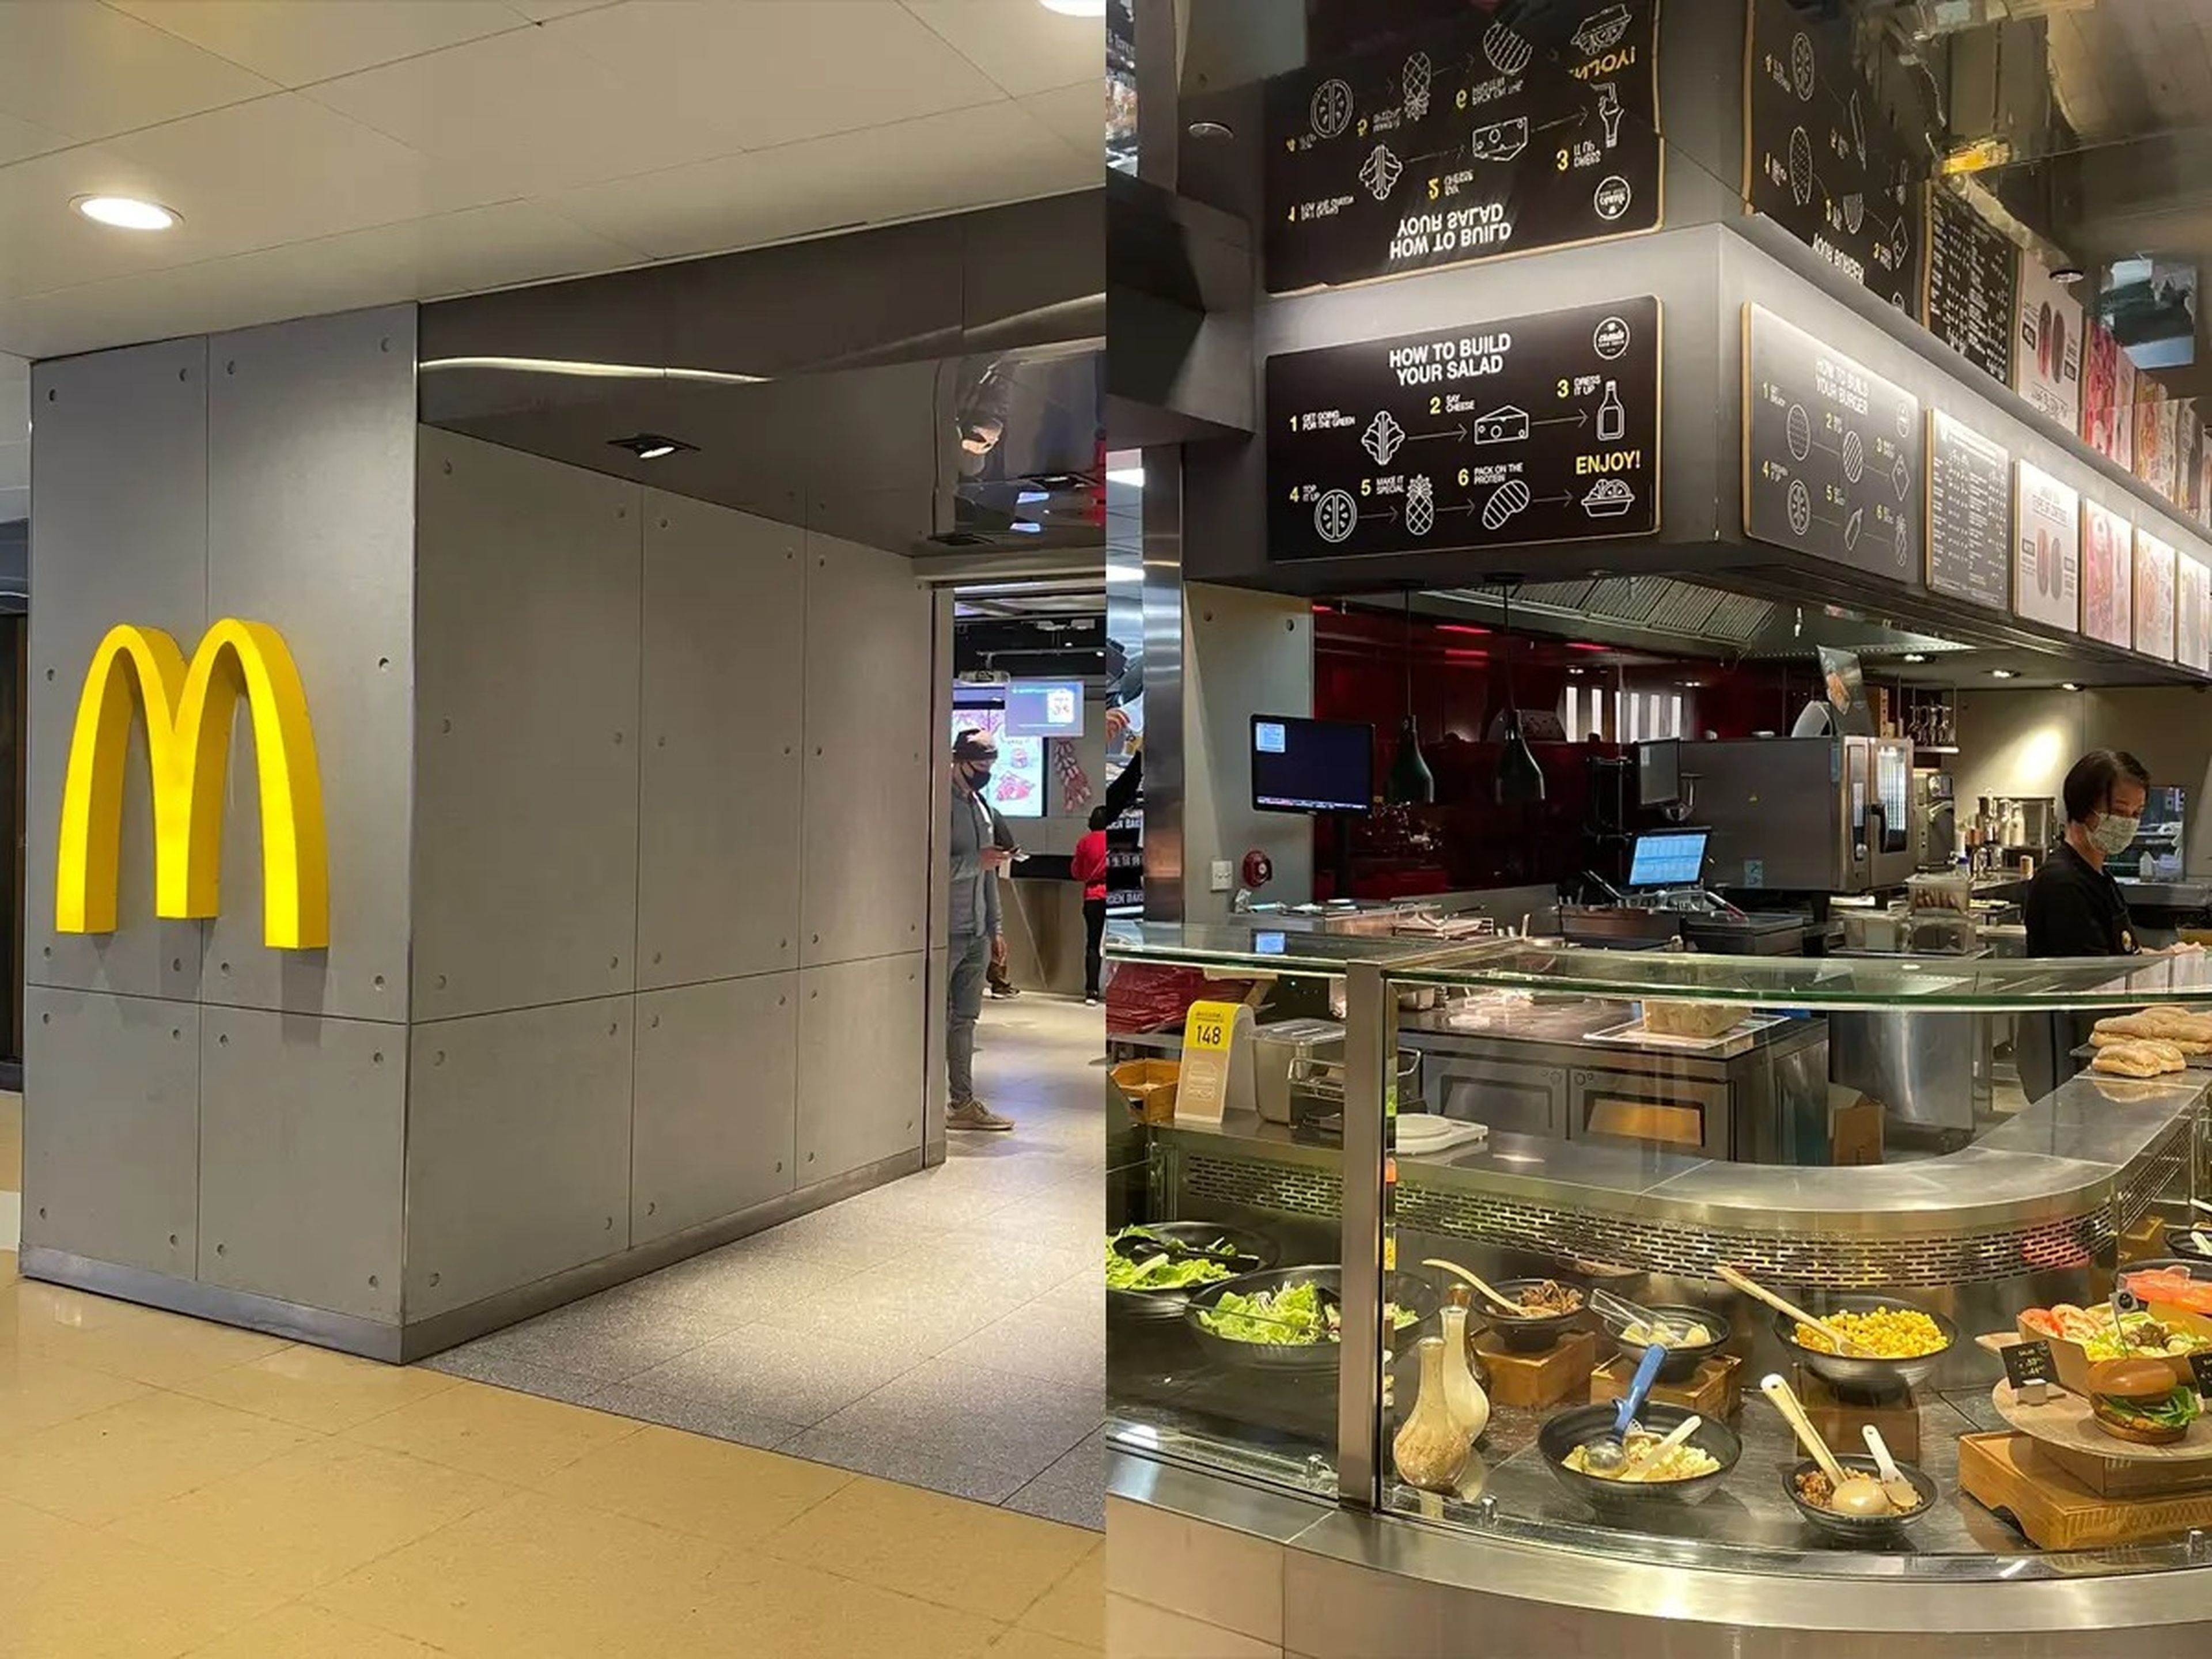 The McDonald's Next exterior, which is a gray building inside of a mall with the McDonald's logo; Build-your-own-salad bar inside a warehouse-style McDonald's with a menu overhead